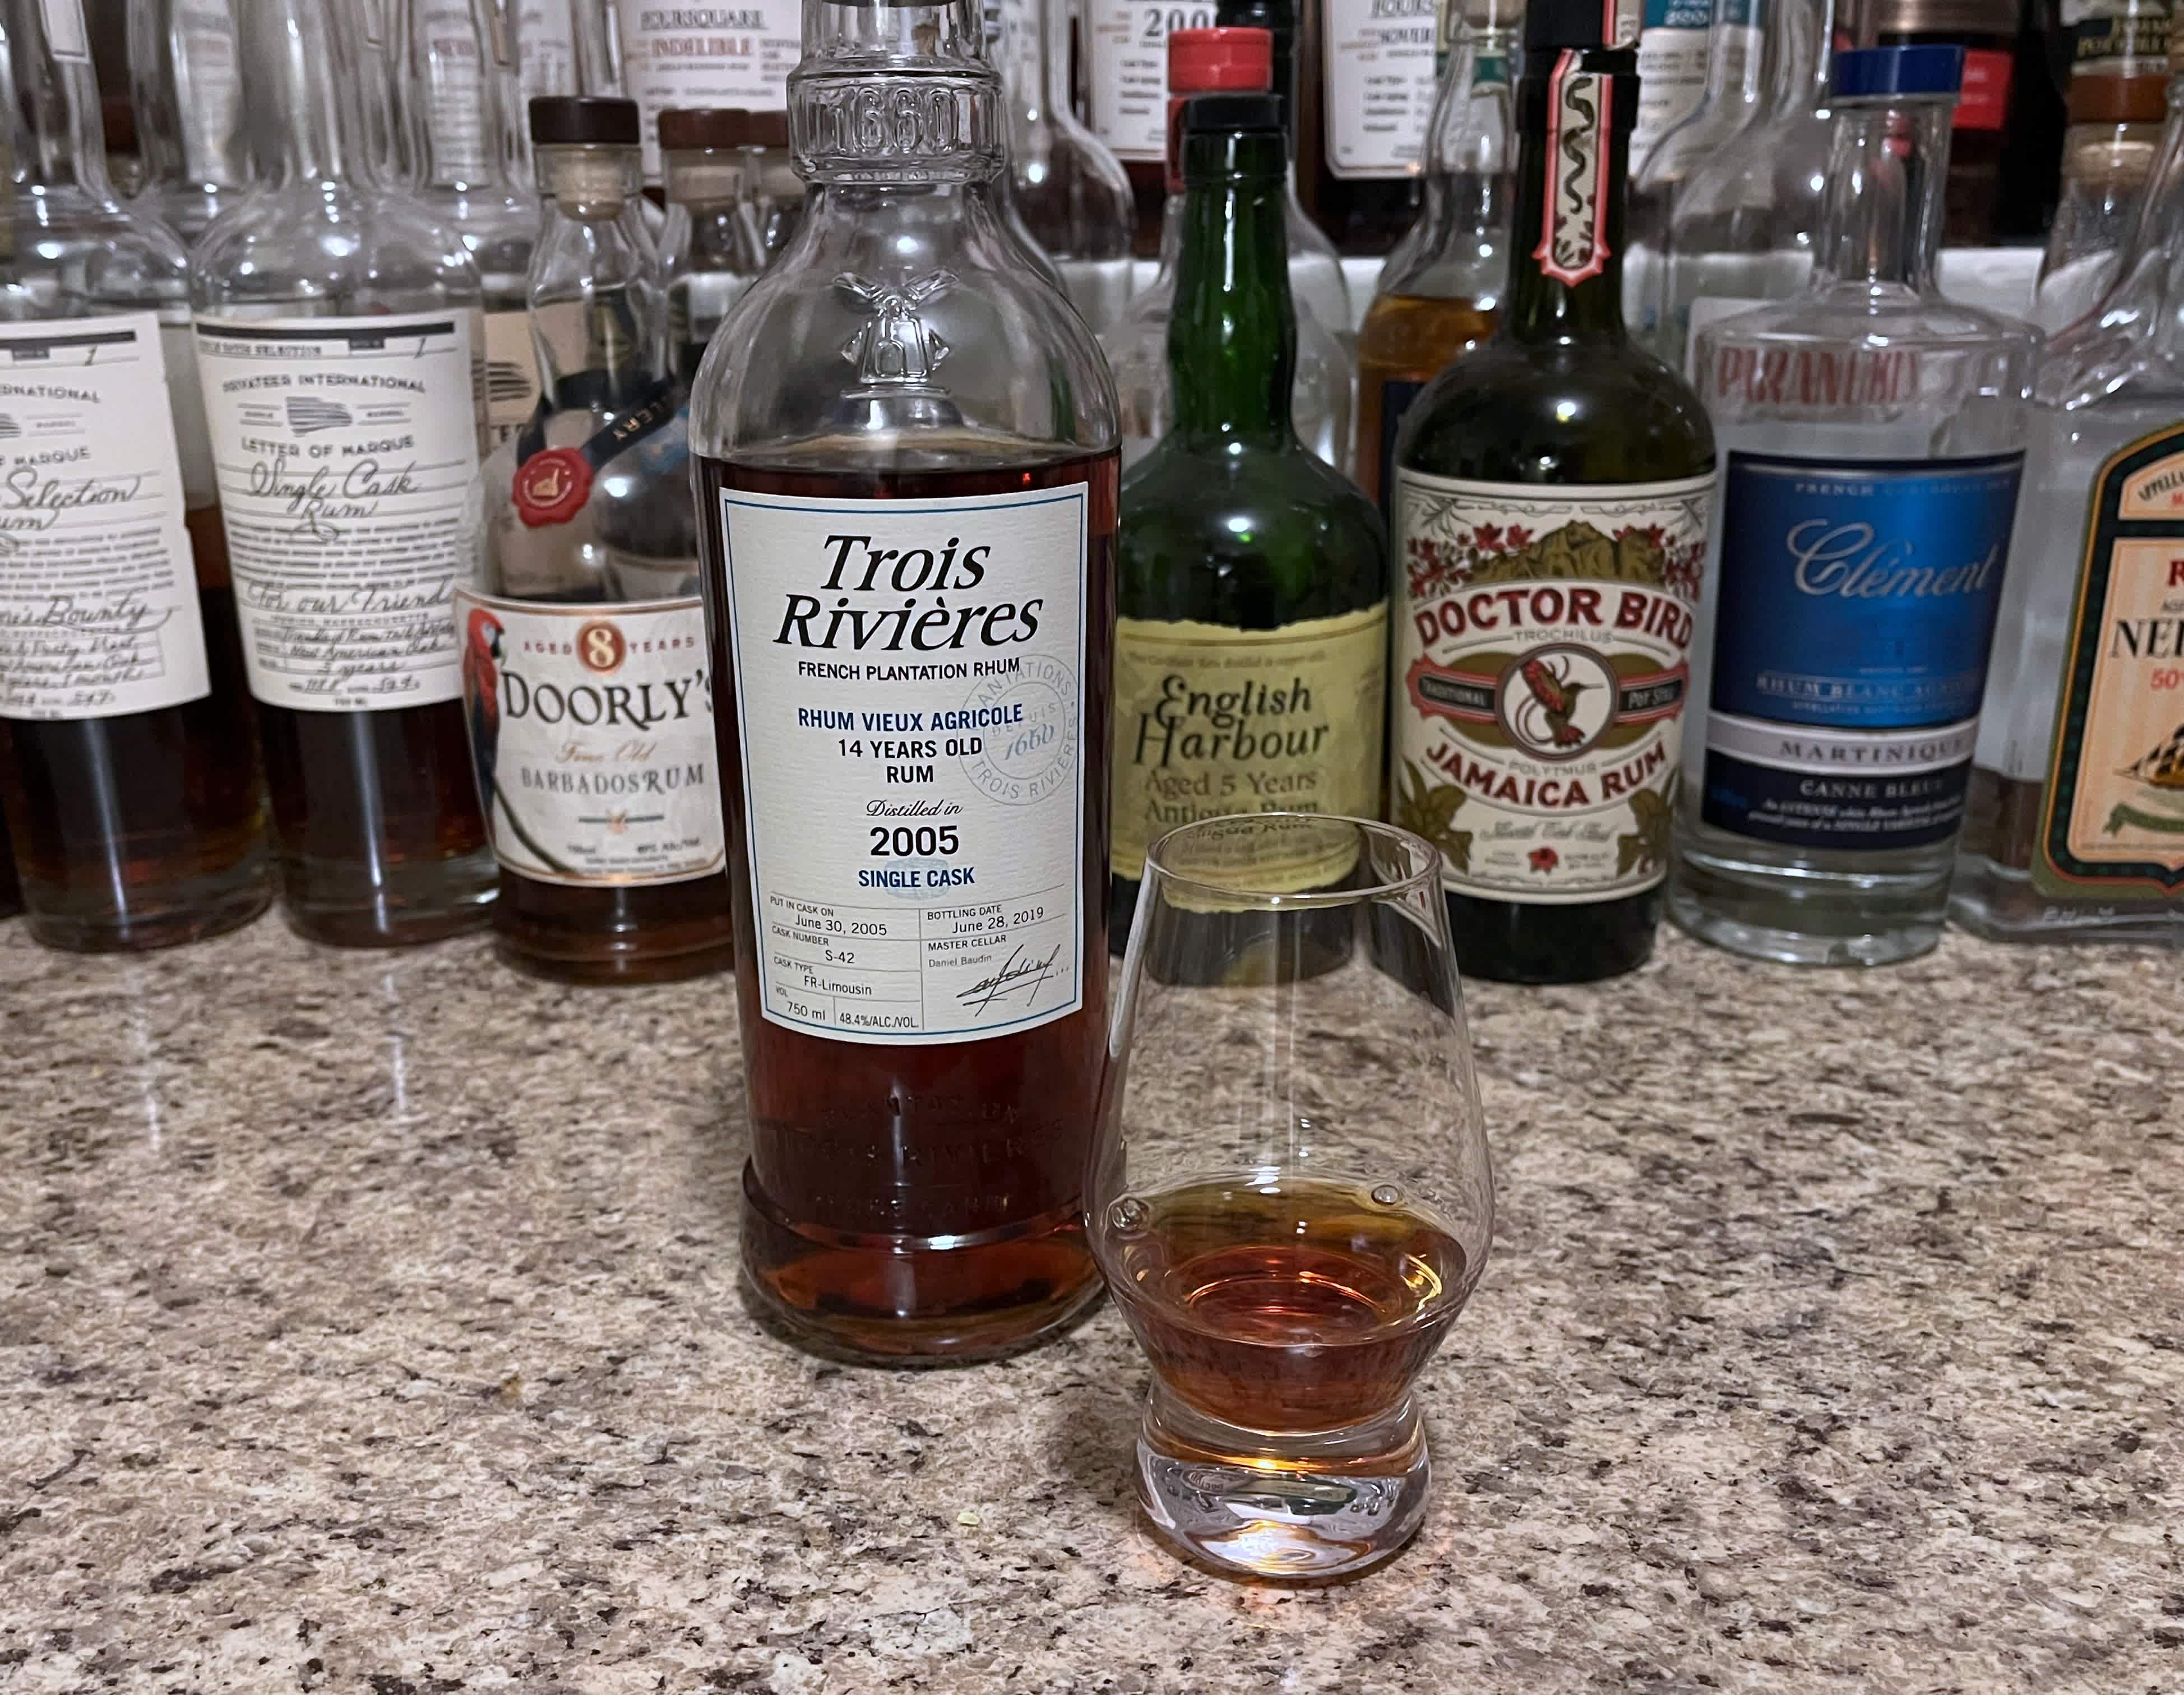 A bottle of Trois Rivières next to a glencairn of rum on a kitchen counter